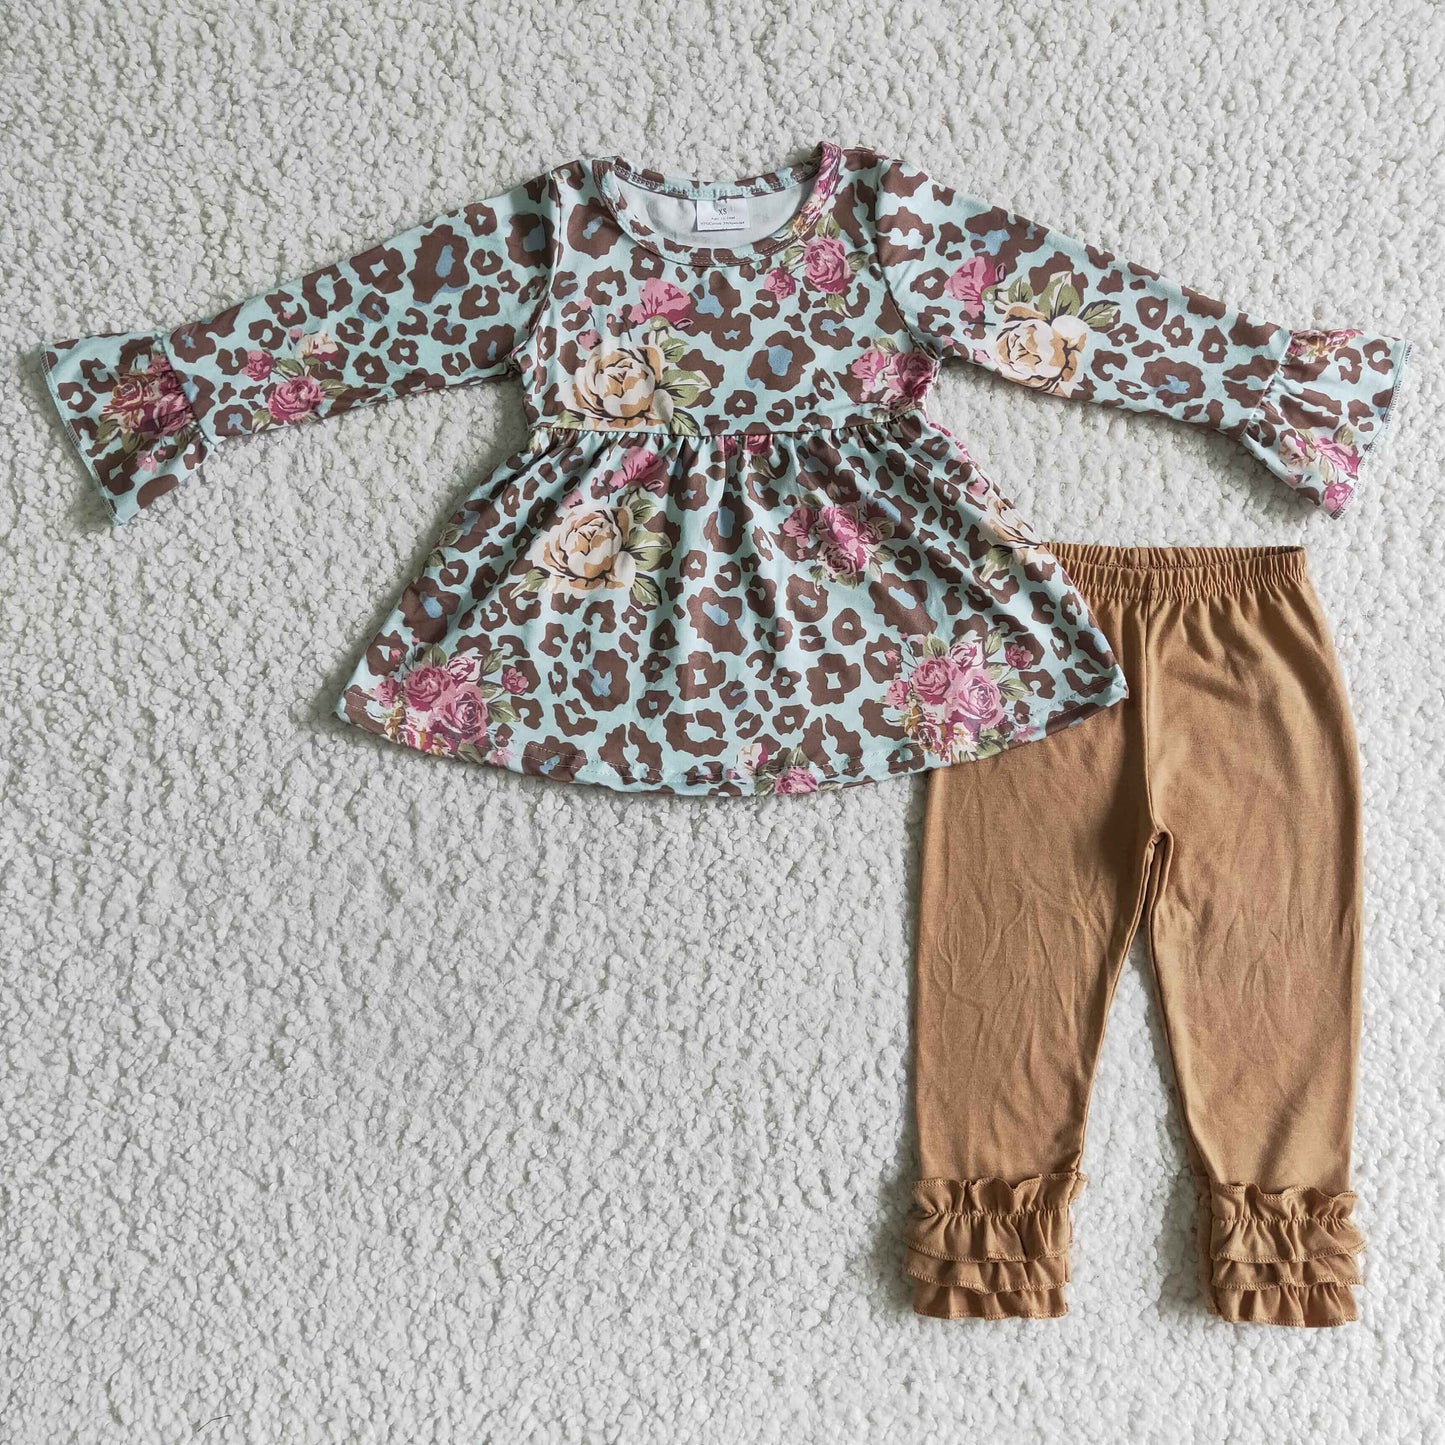 Leopard floral tunic leggings girls fall outfits